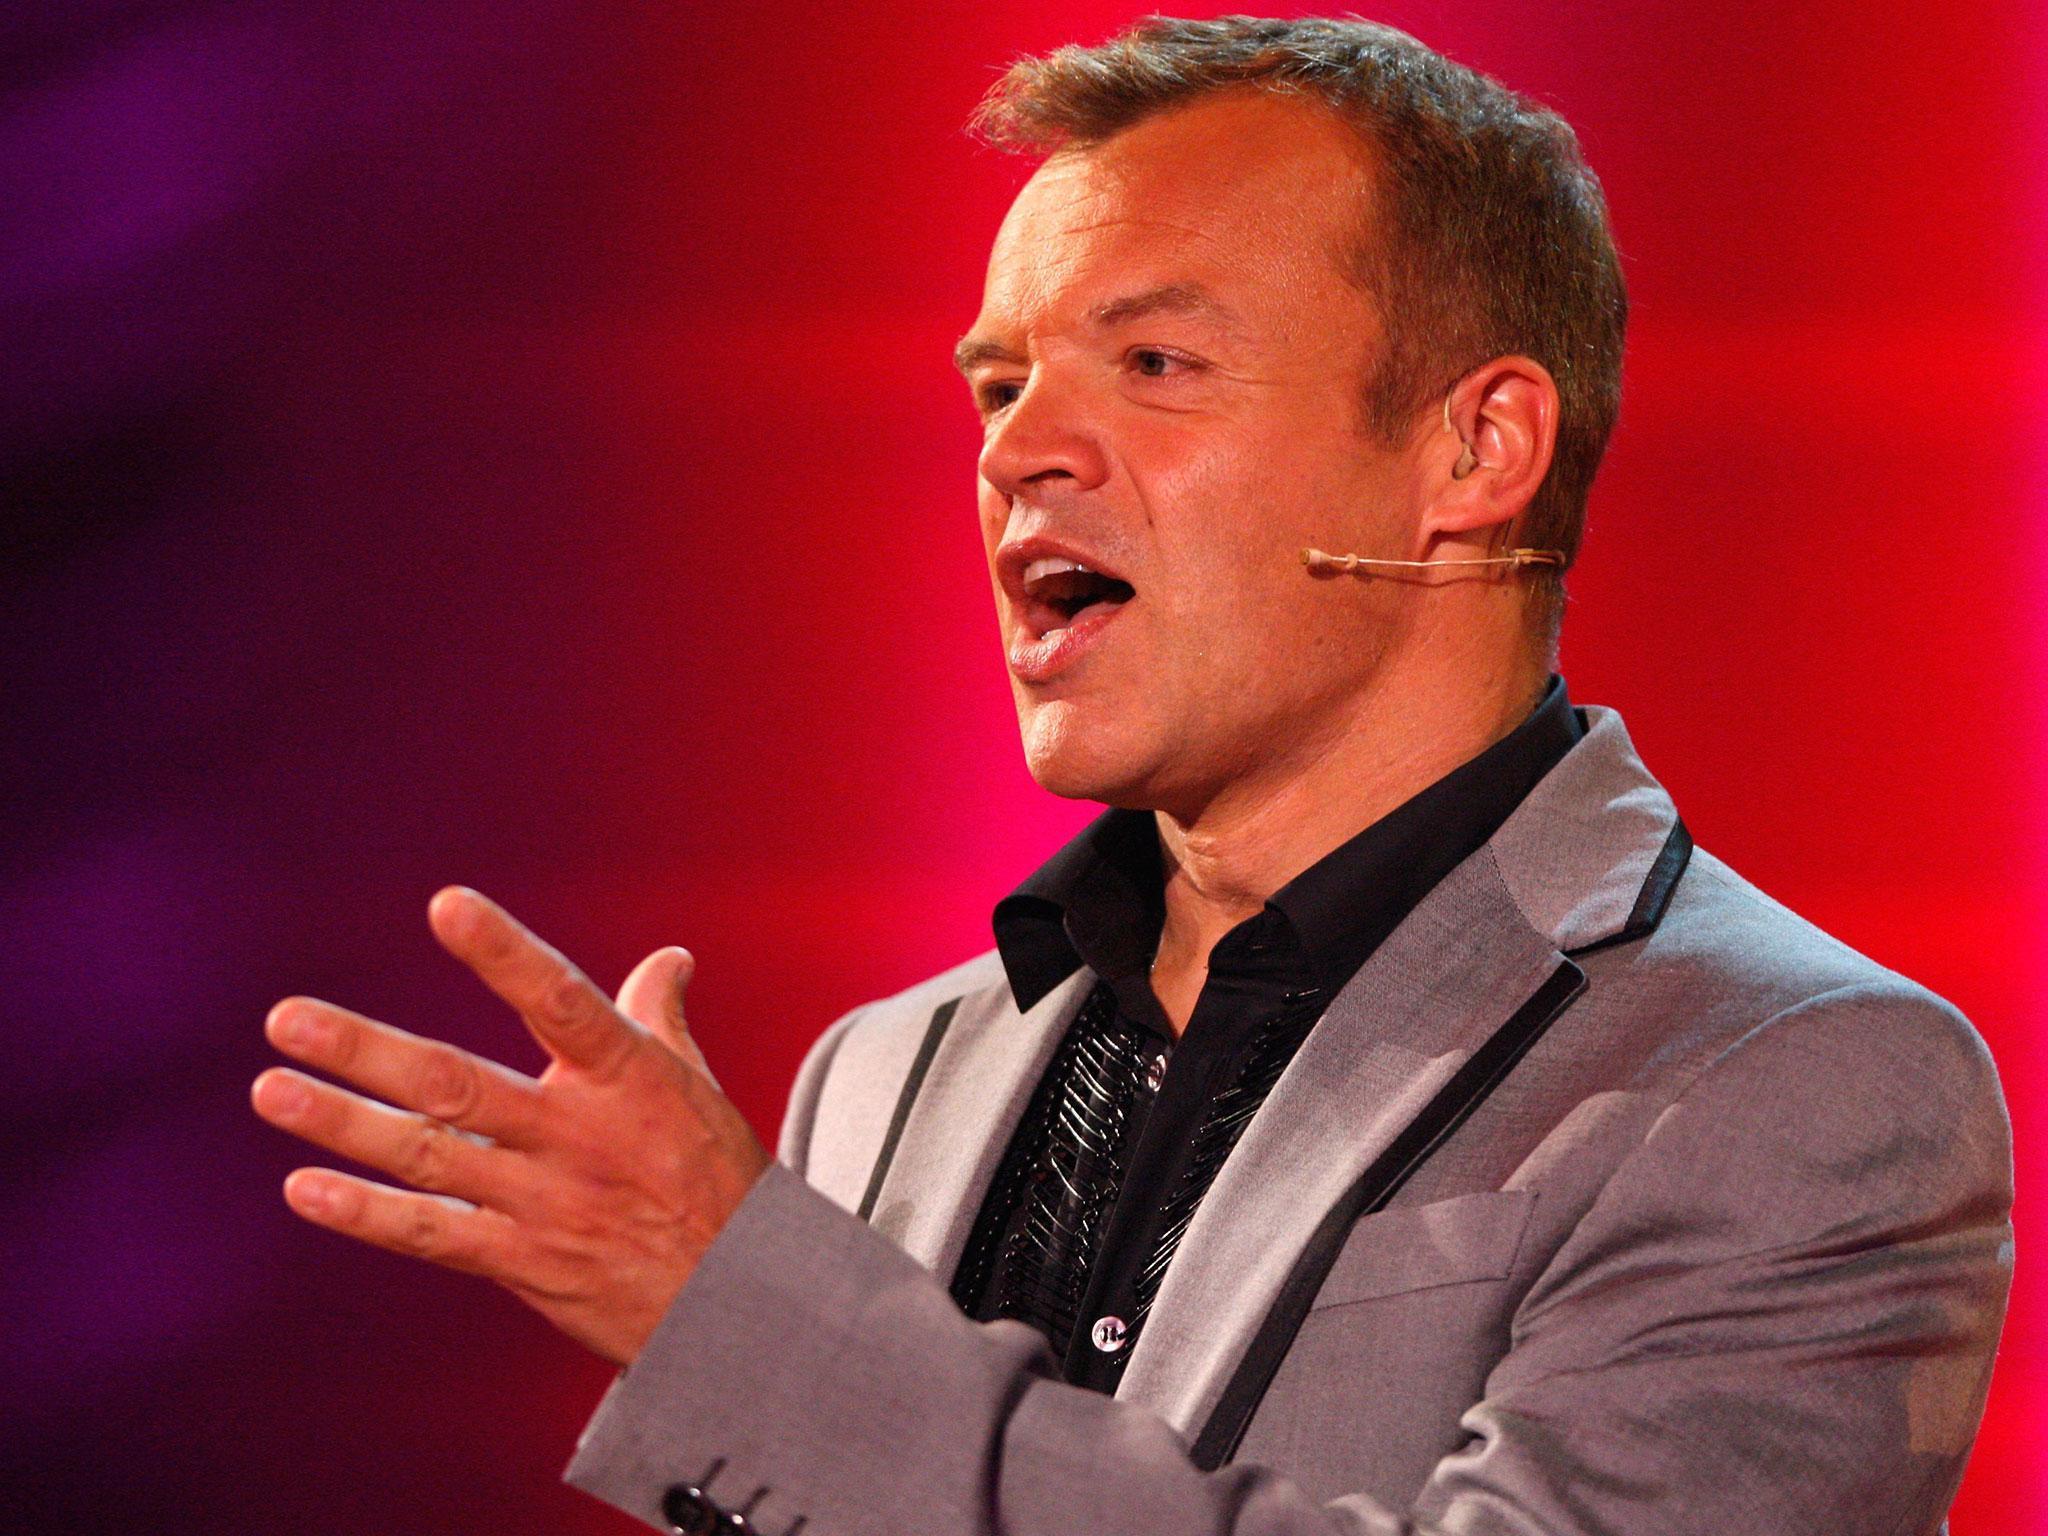 Graham Norton gave his first witty Eurovision Song Contest commentary in 2009